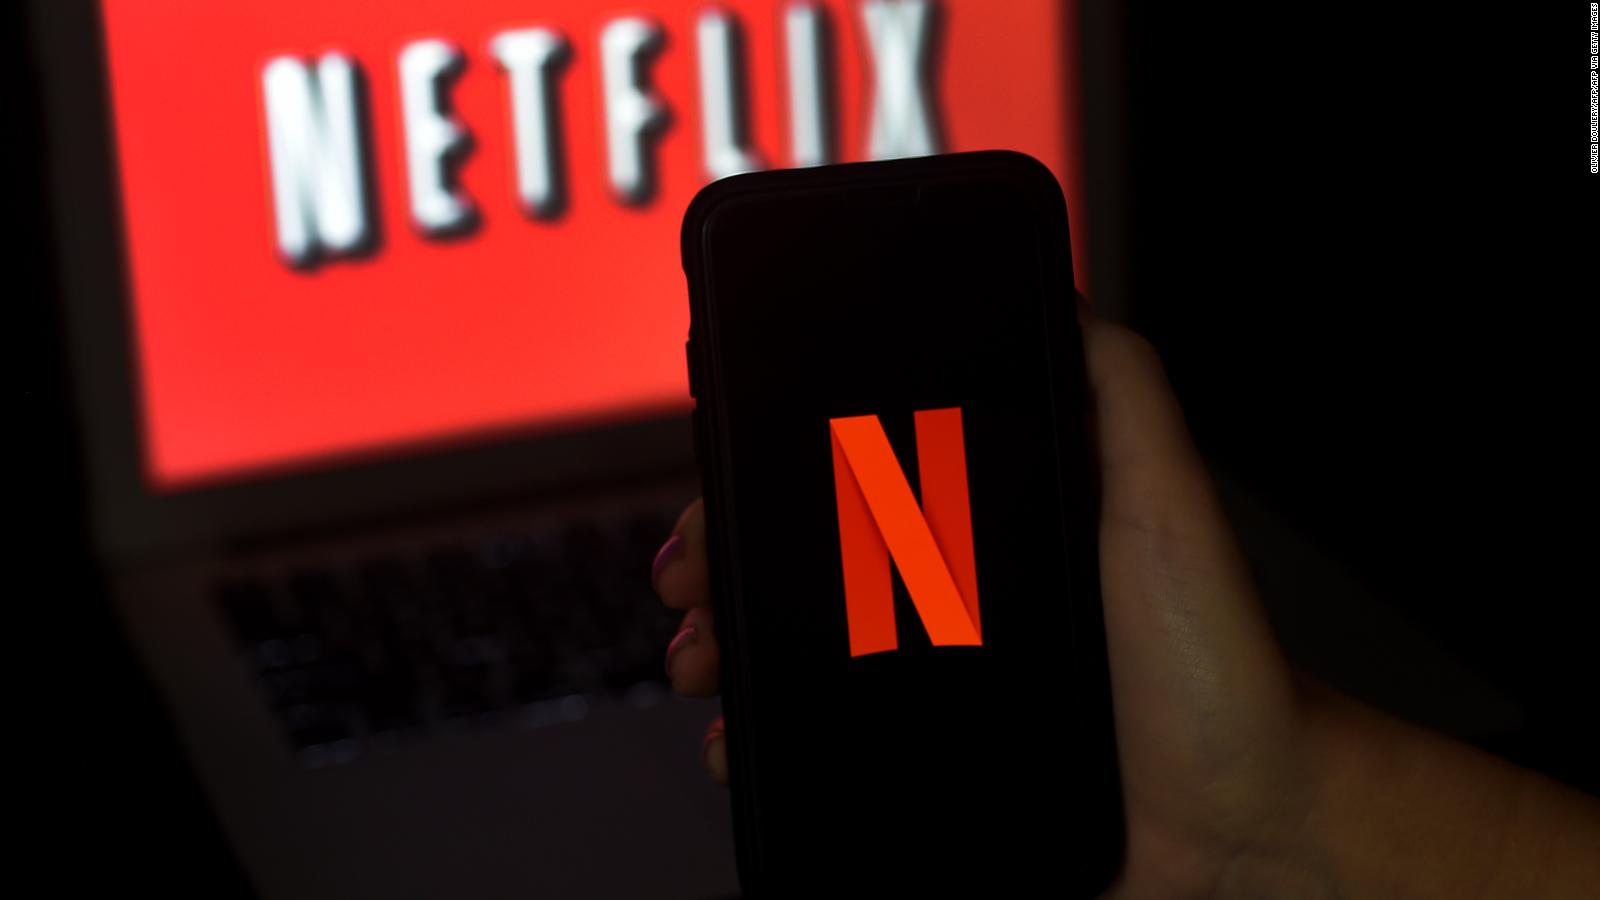 Netflix does not share information about sharing your content